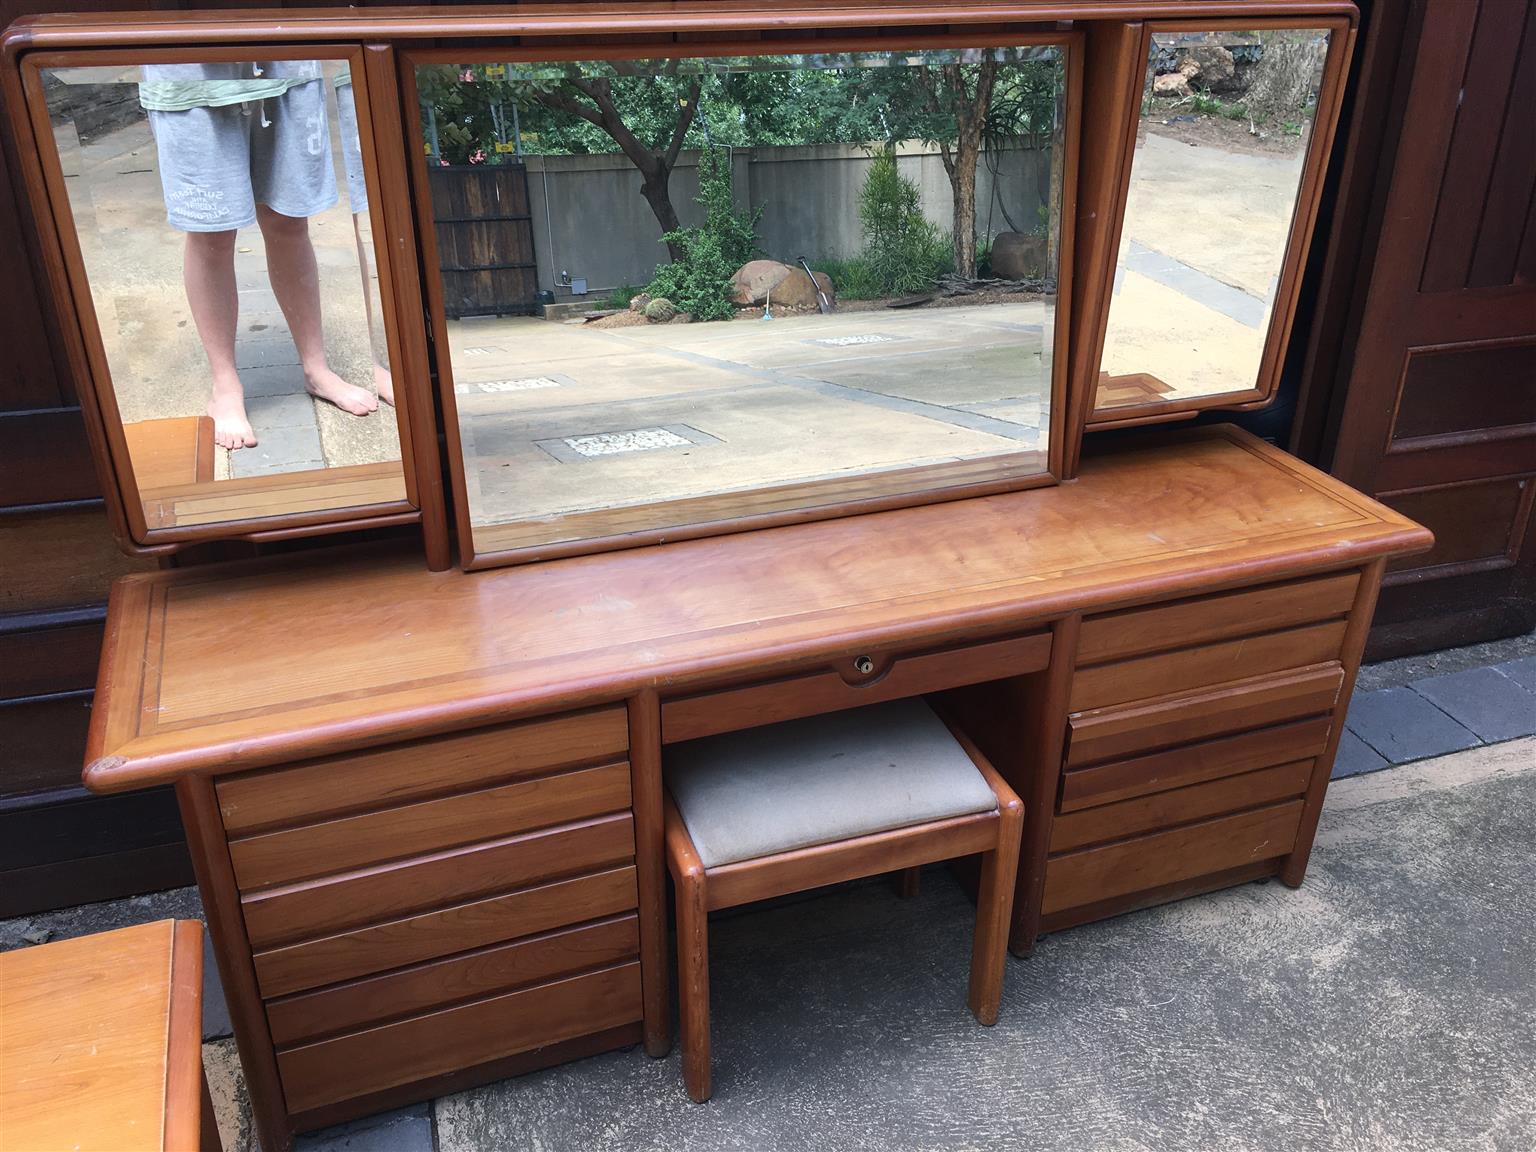 Cherry dressing table with 2 side drawers and a heardboard all for 3000